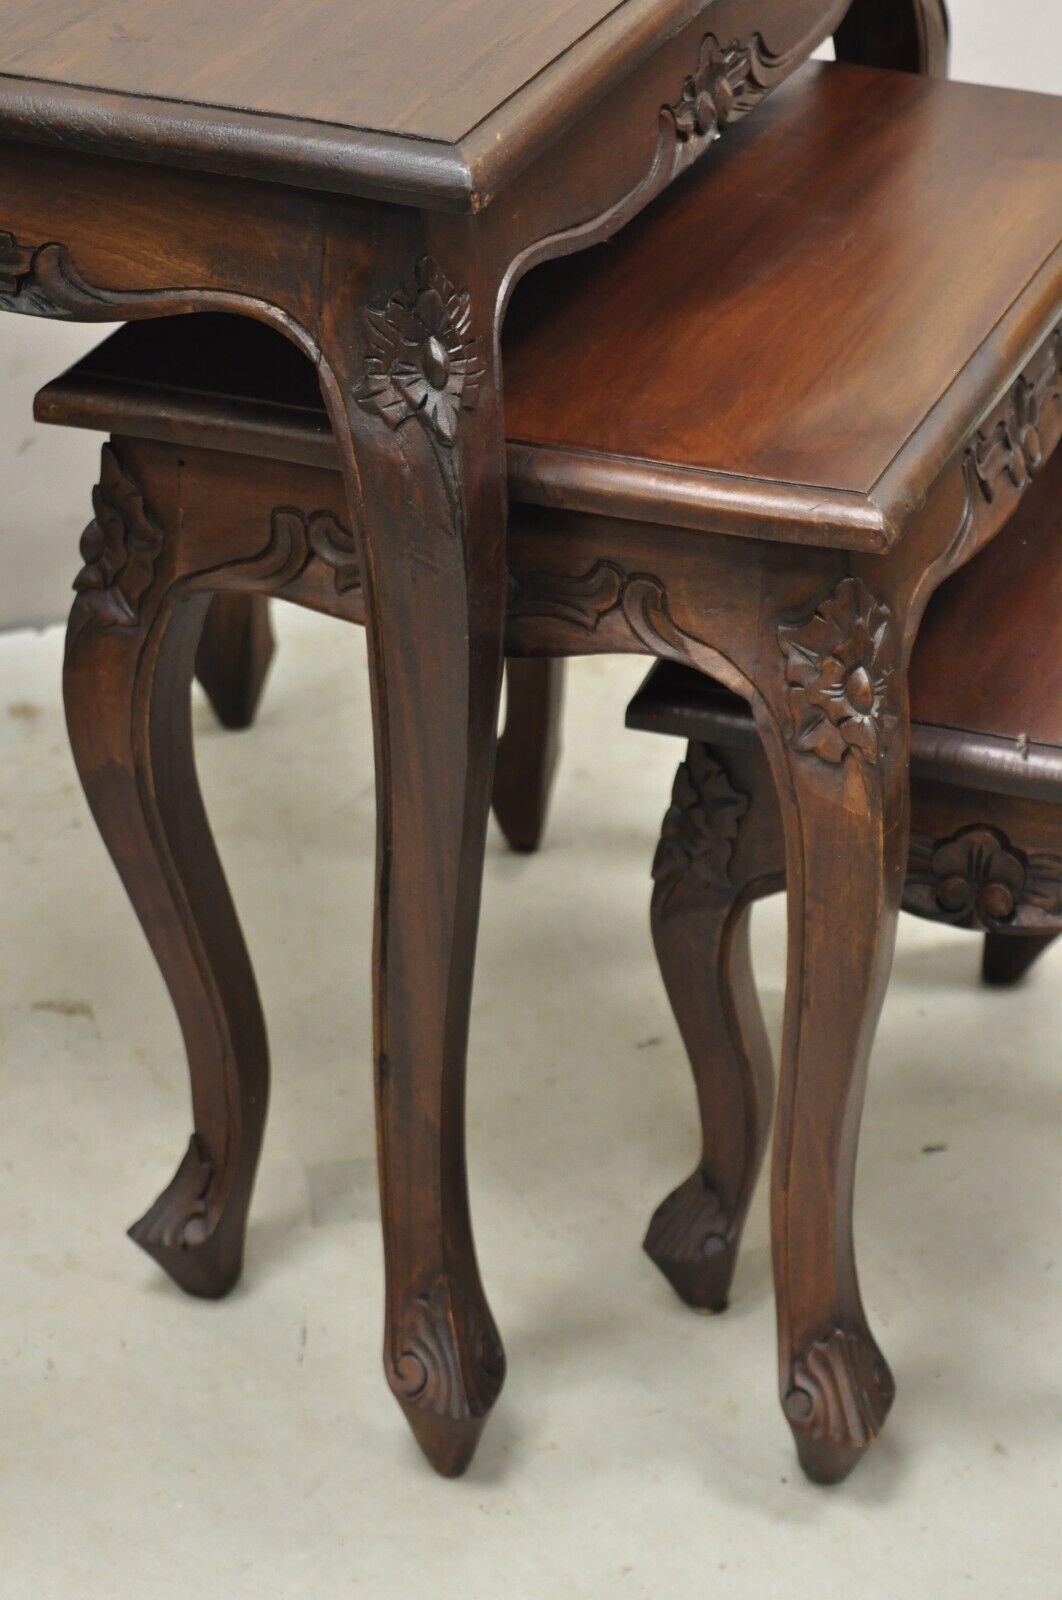 20th Century Vintage French Rococo Style Mahogany Nesting Side Tables - Set of 3 For Sale